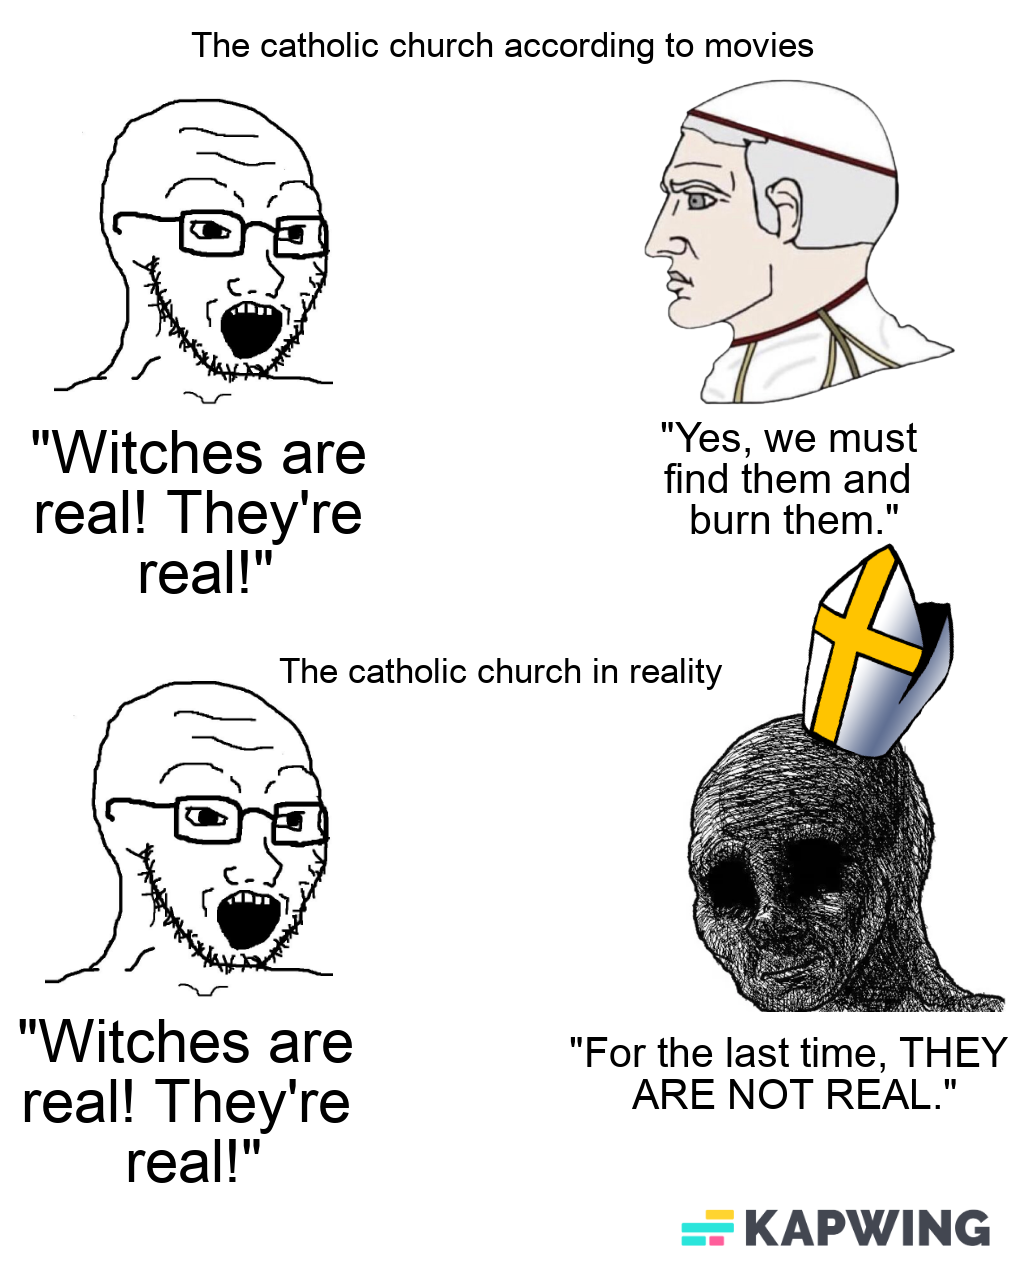 Daily reminder that the protestants mainly did witch hunts and the church outright made it illegal to do them.